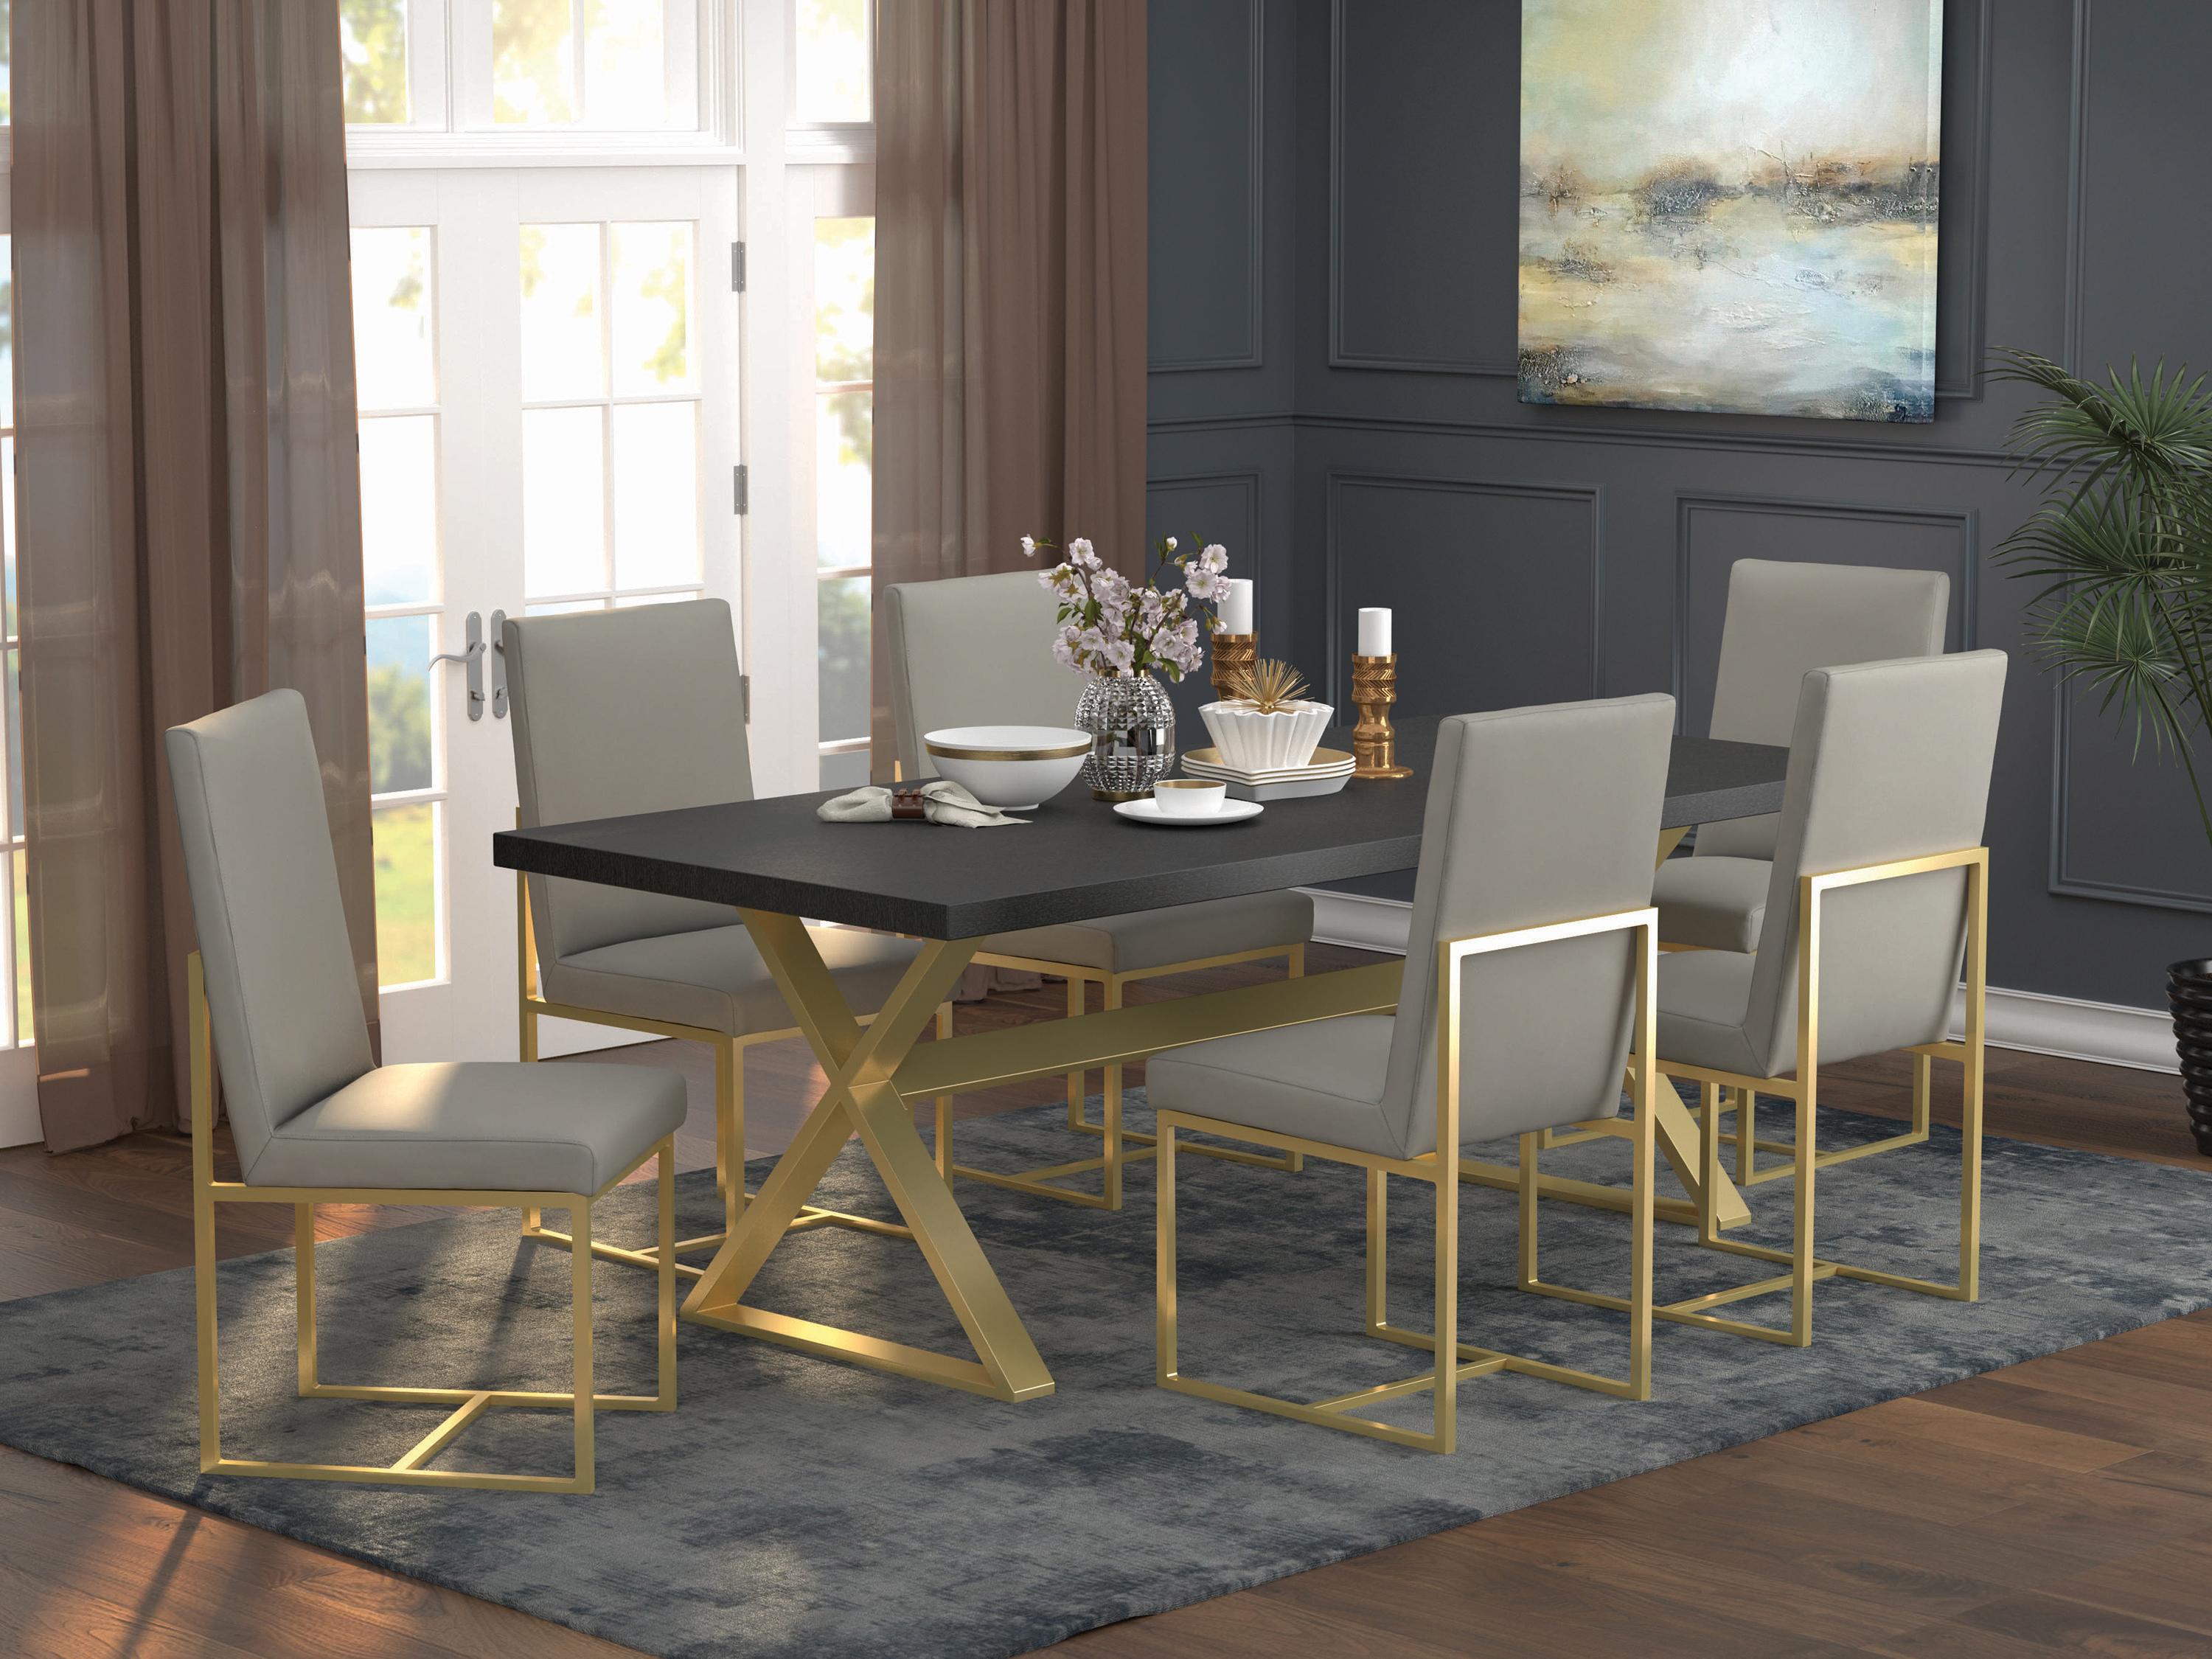 Contemporary Dining Room Set 191991-S5 Conway 191991-S5 in Gold Leatherette